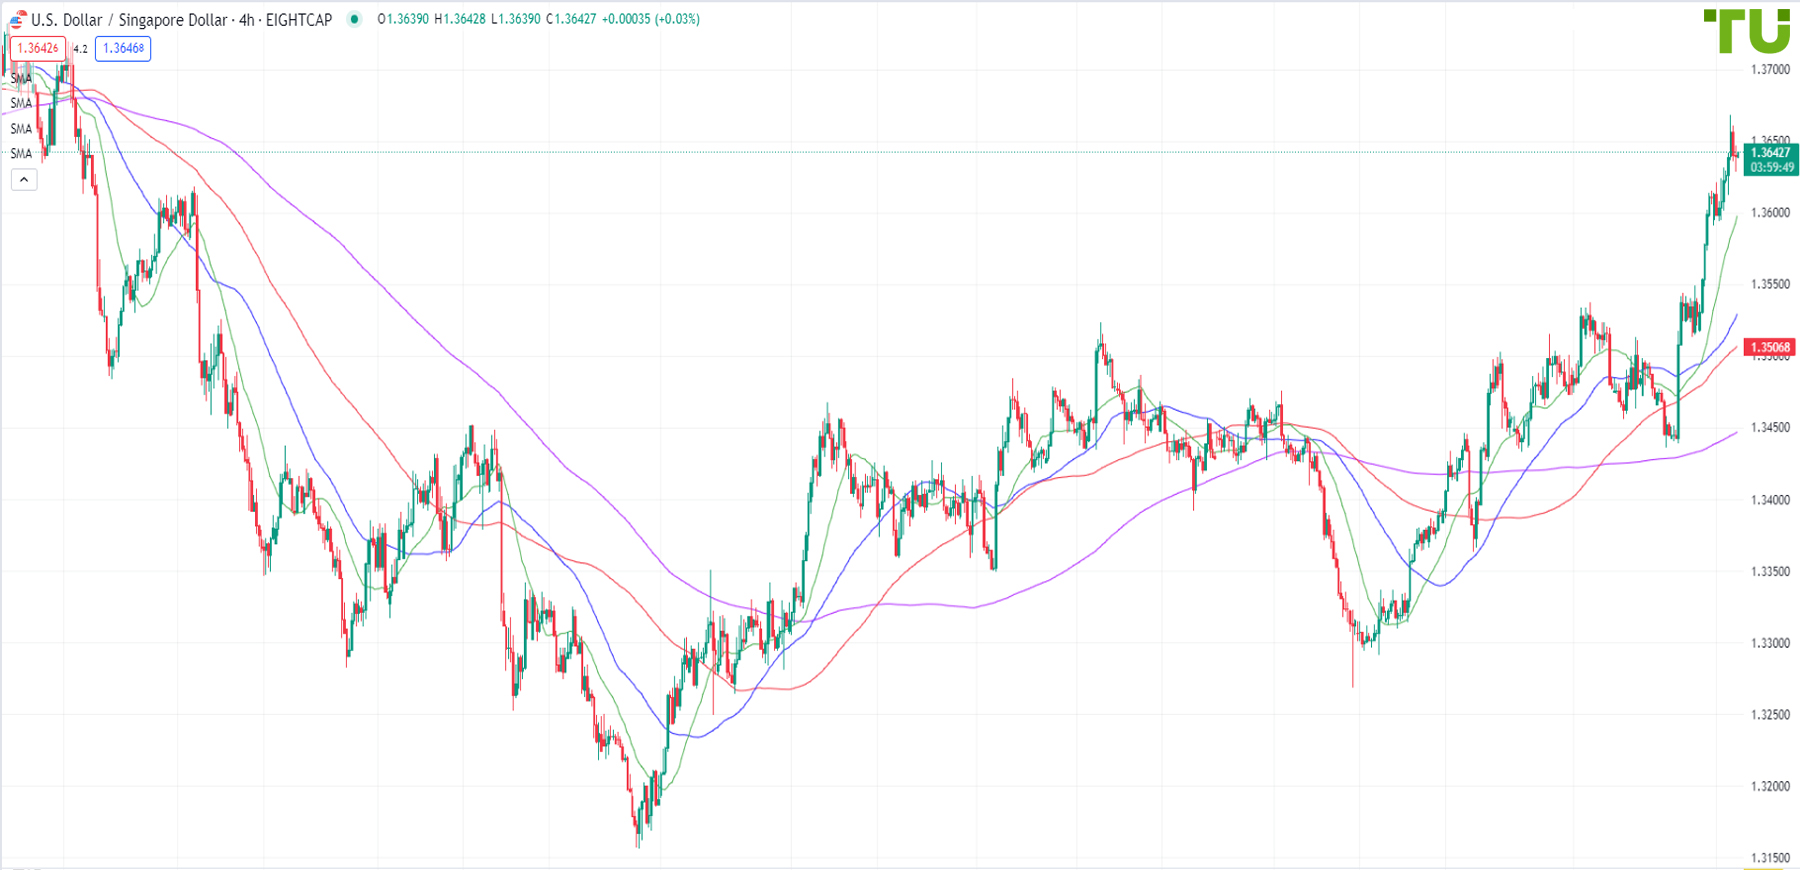 USD/SGD pulled back to support after rising